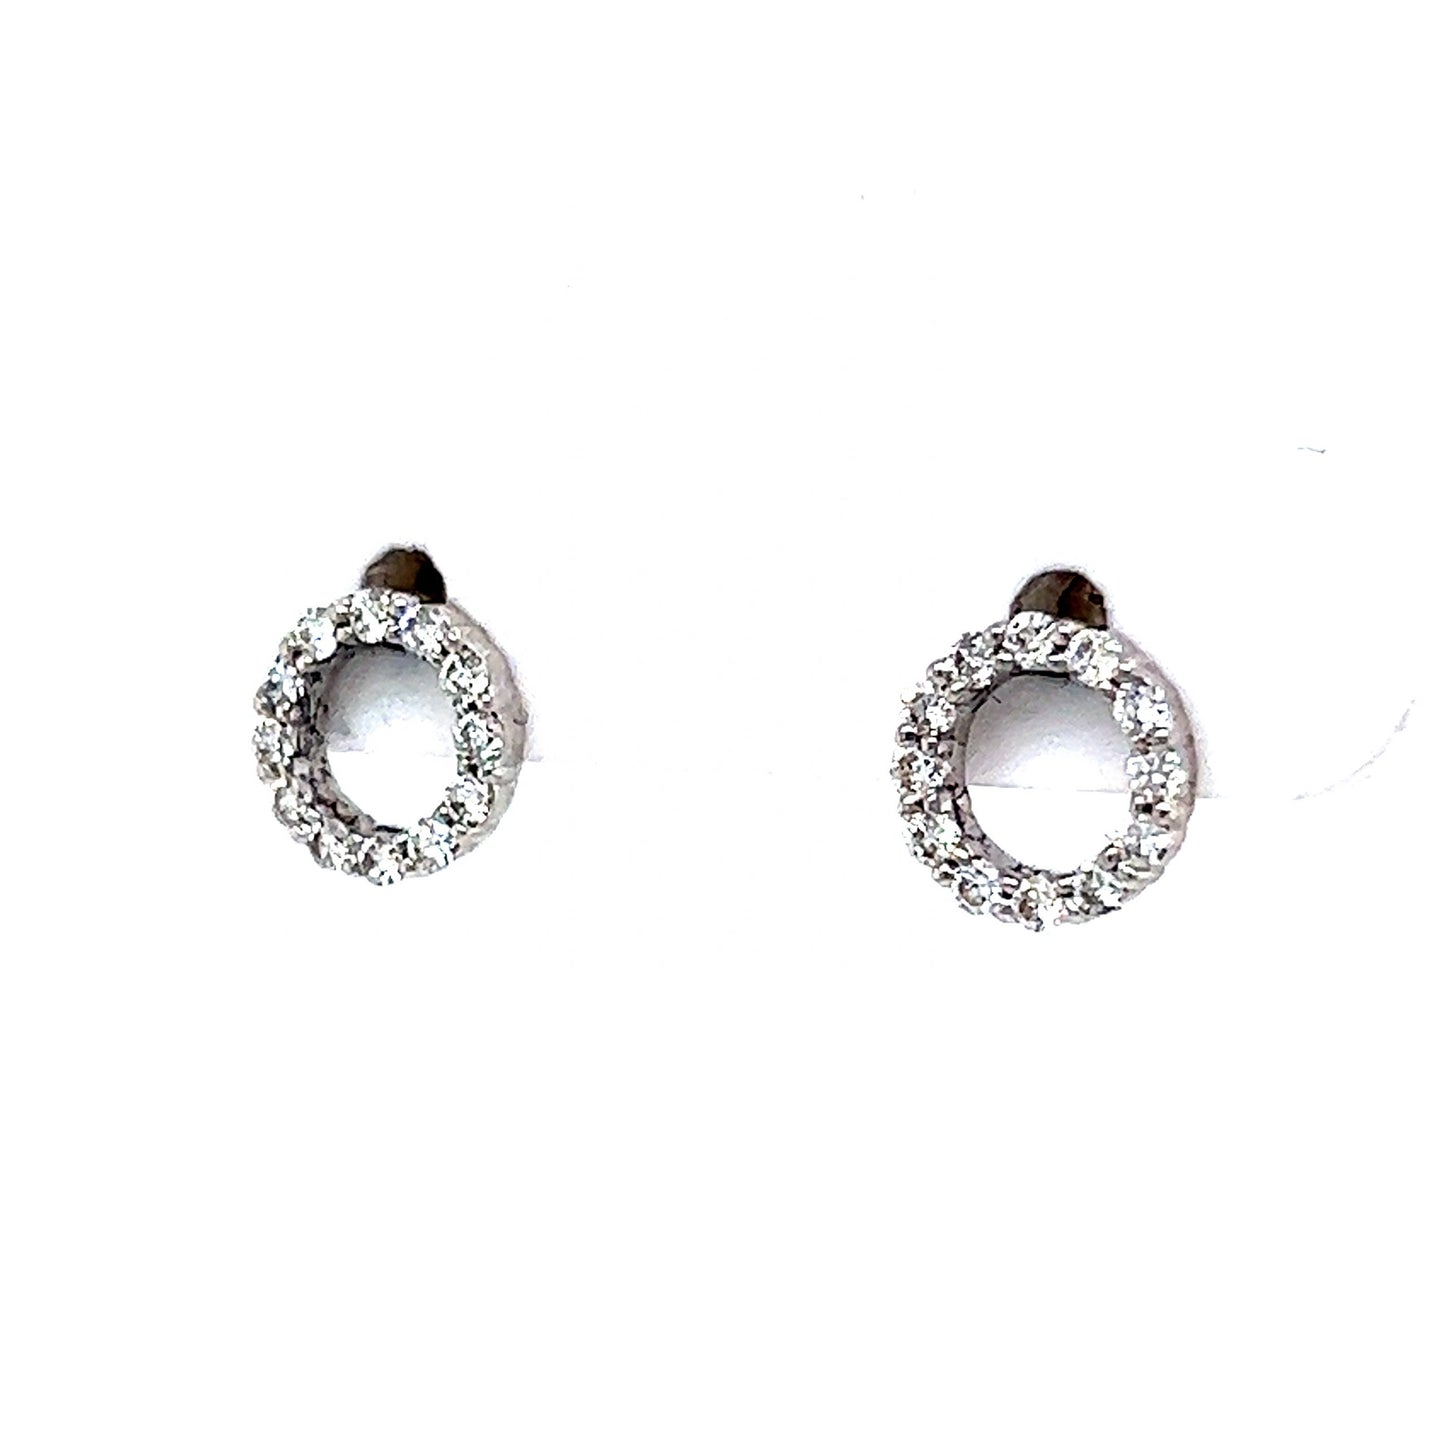 Pave Diamond Circle Stud Earrings in 14k White Gold